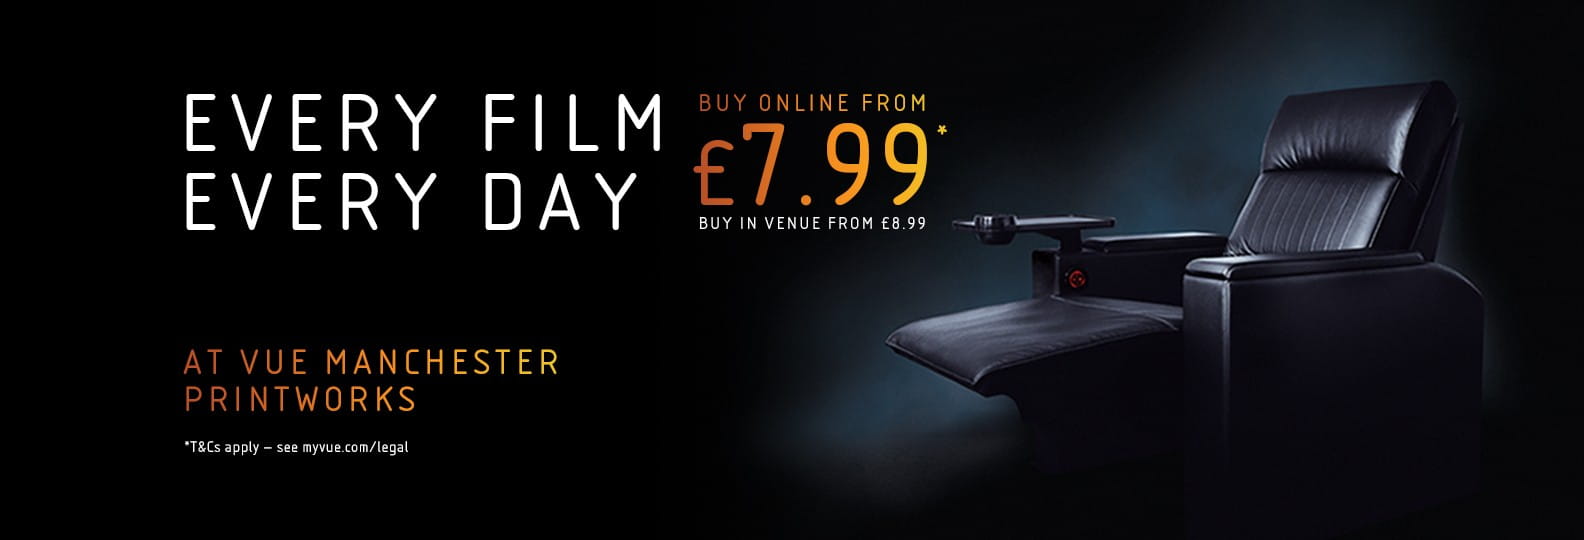 Every Day, Every Film from £7.99 at Vue Manchester Printworks